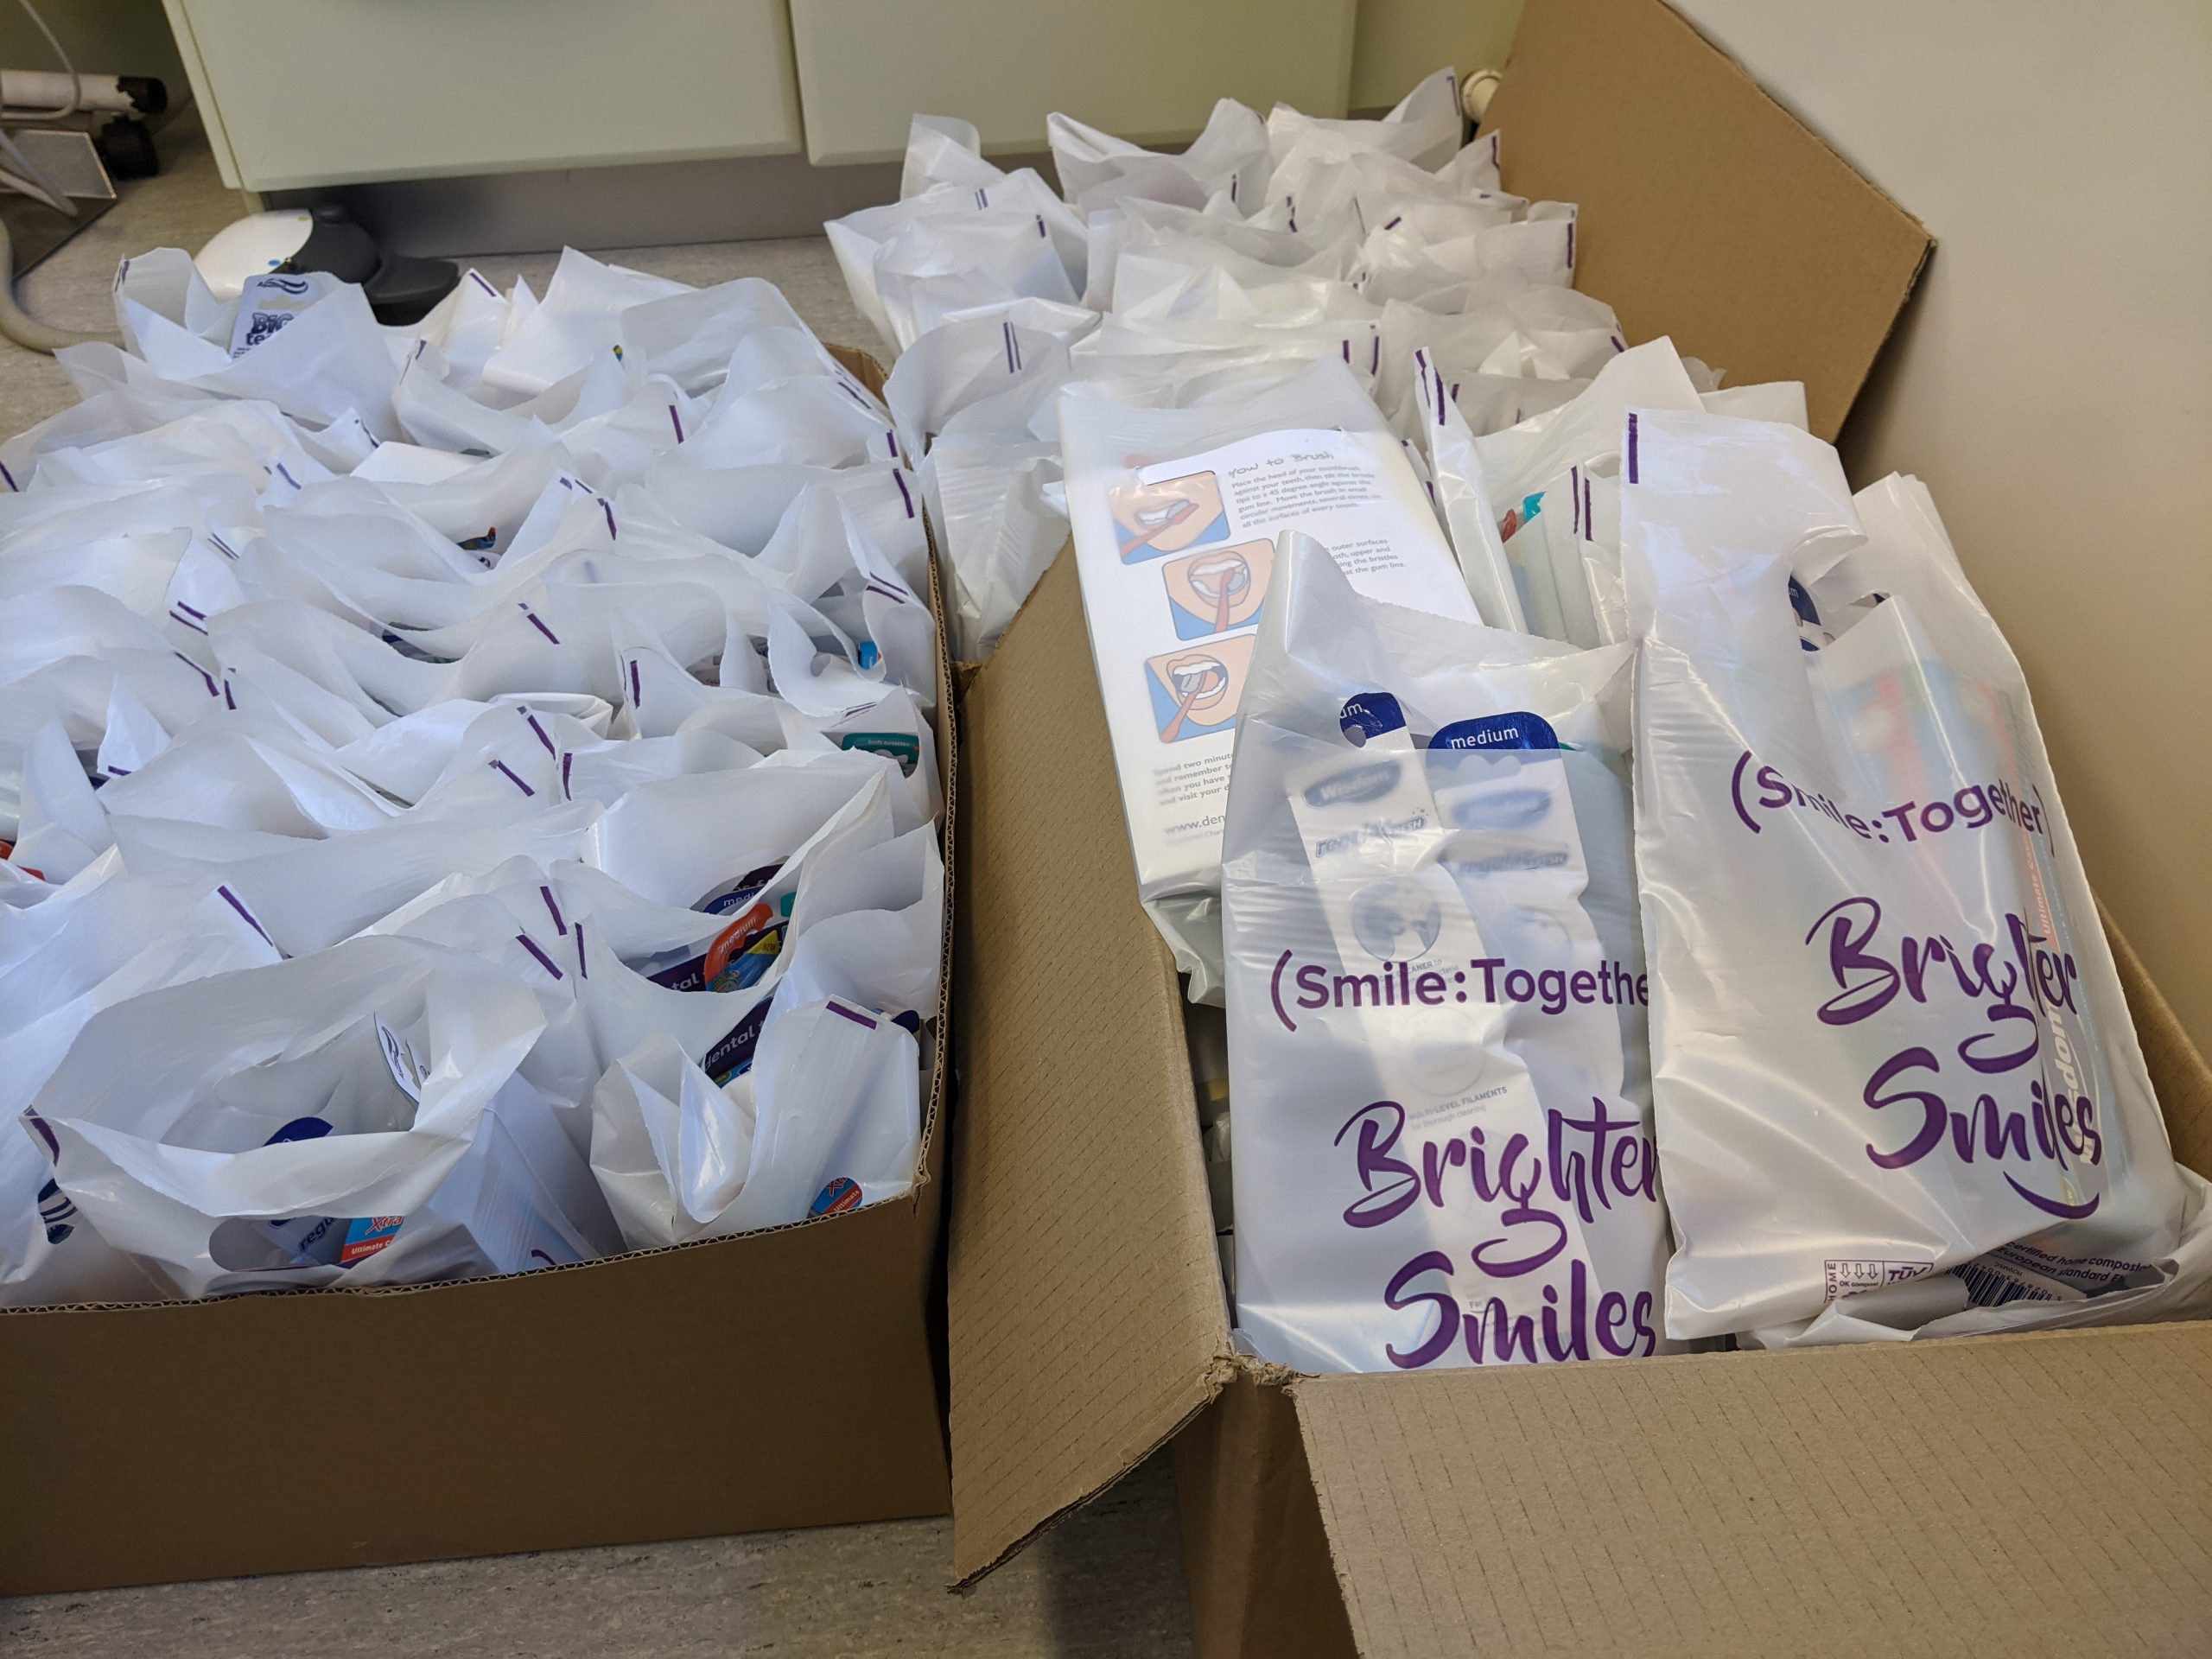 Two boxes full of oral health packs showing Smile Together and Brighter Smiles logos